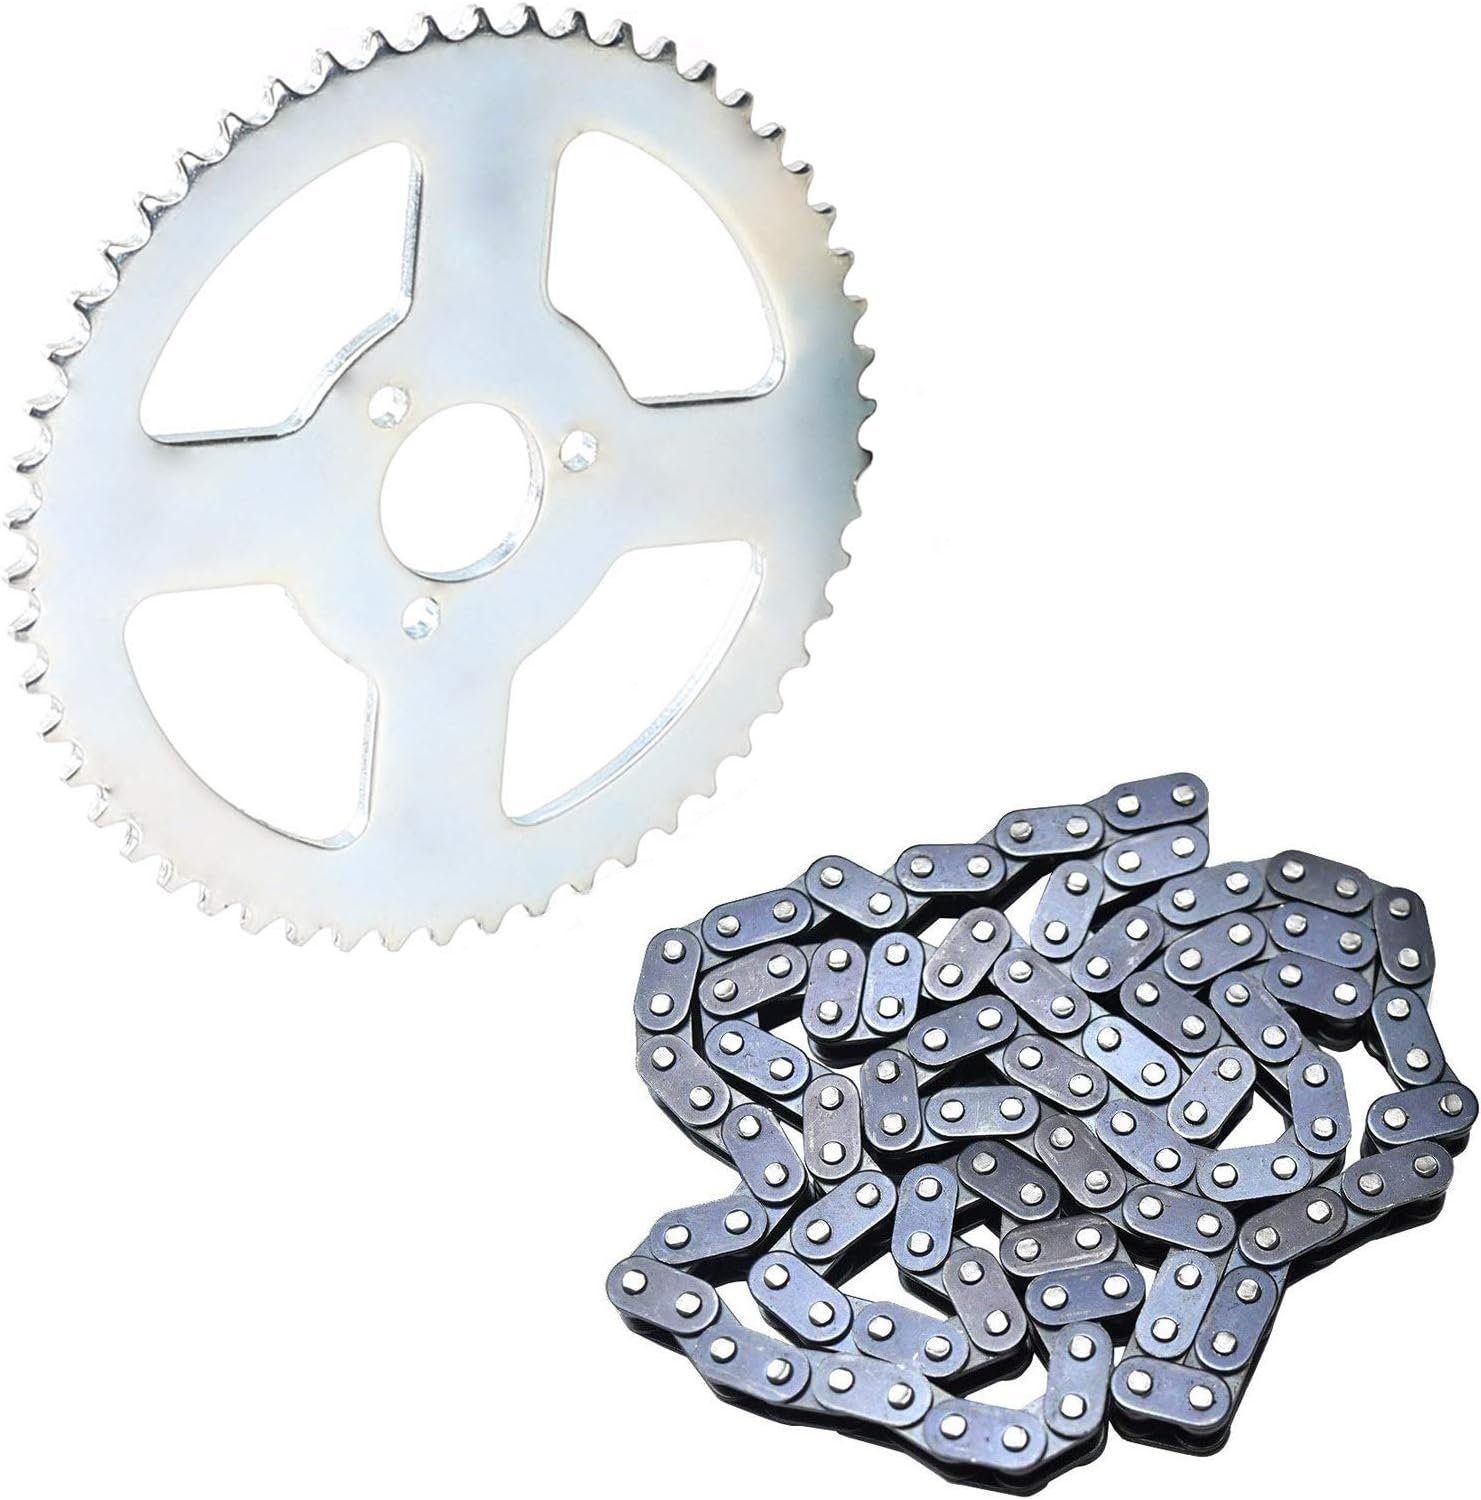 54T T8F Rear Chain Sprocket Review